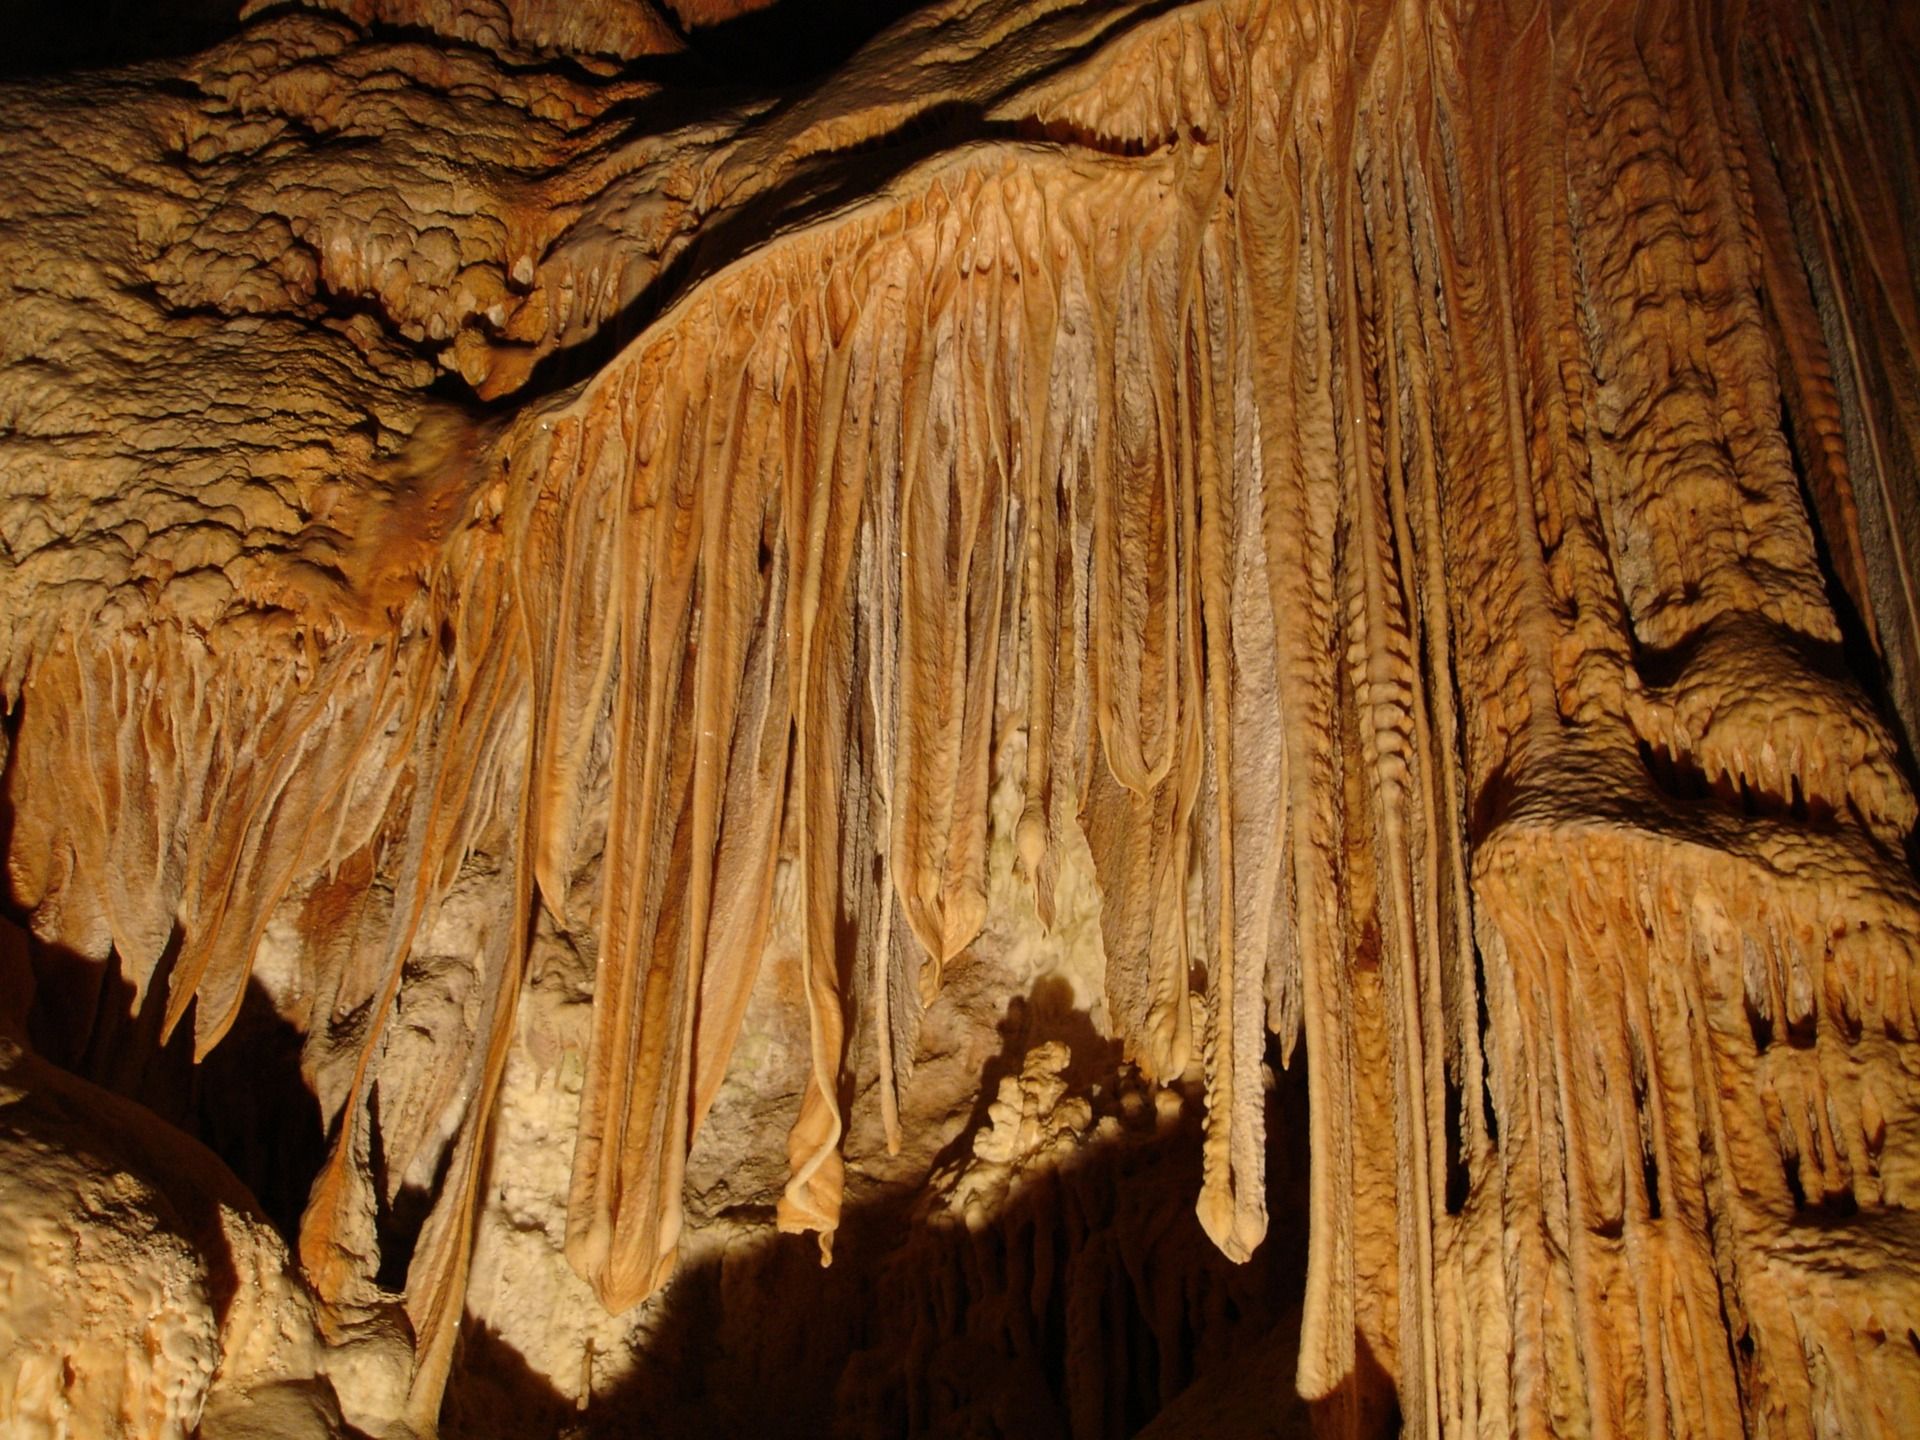 Eerie stalactite cascade in a cavern